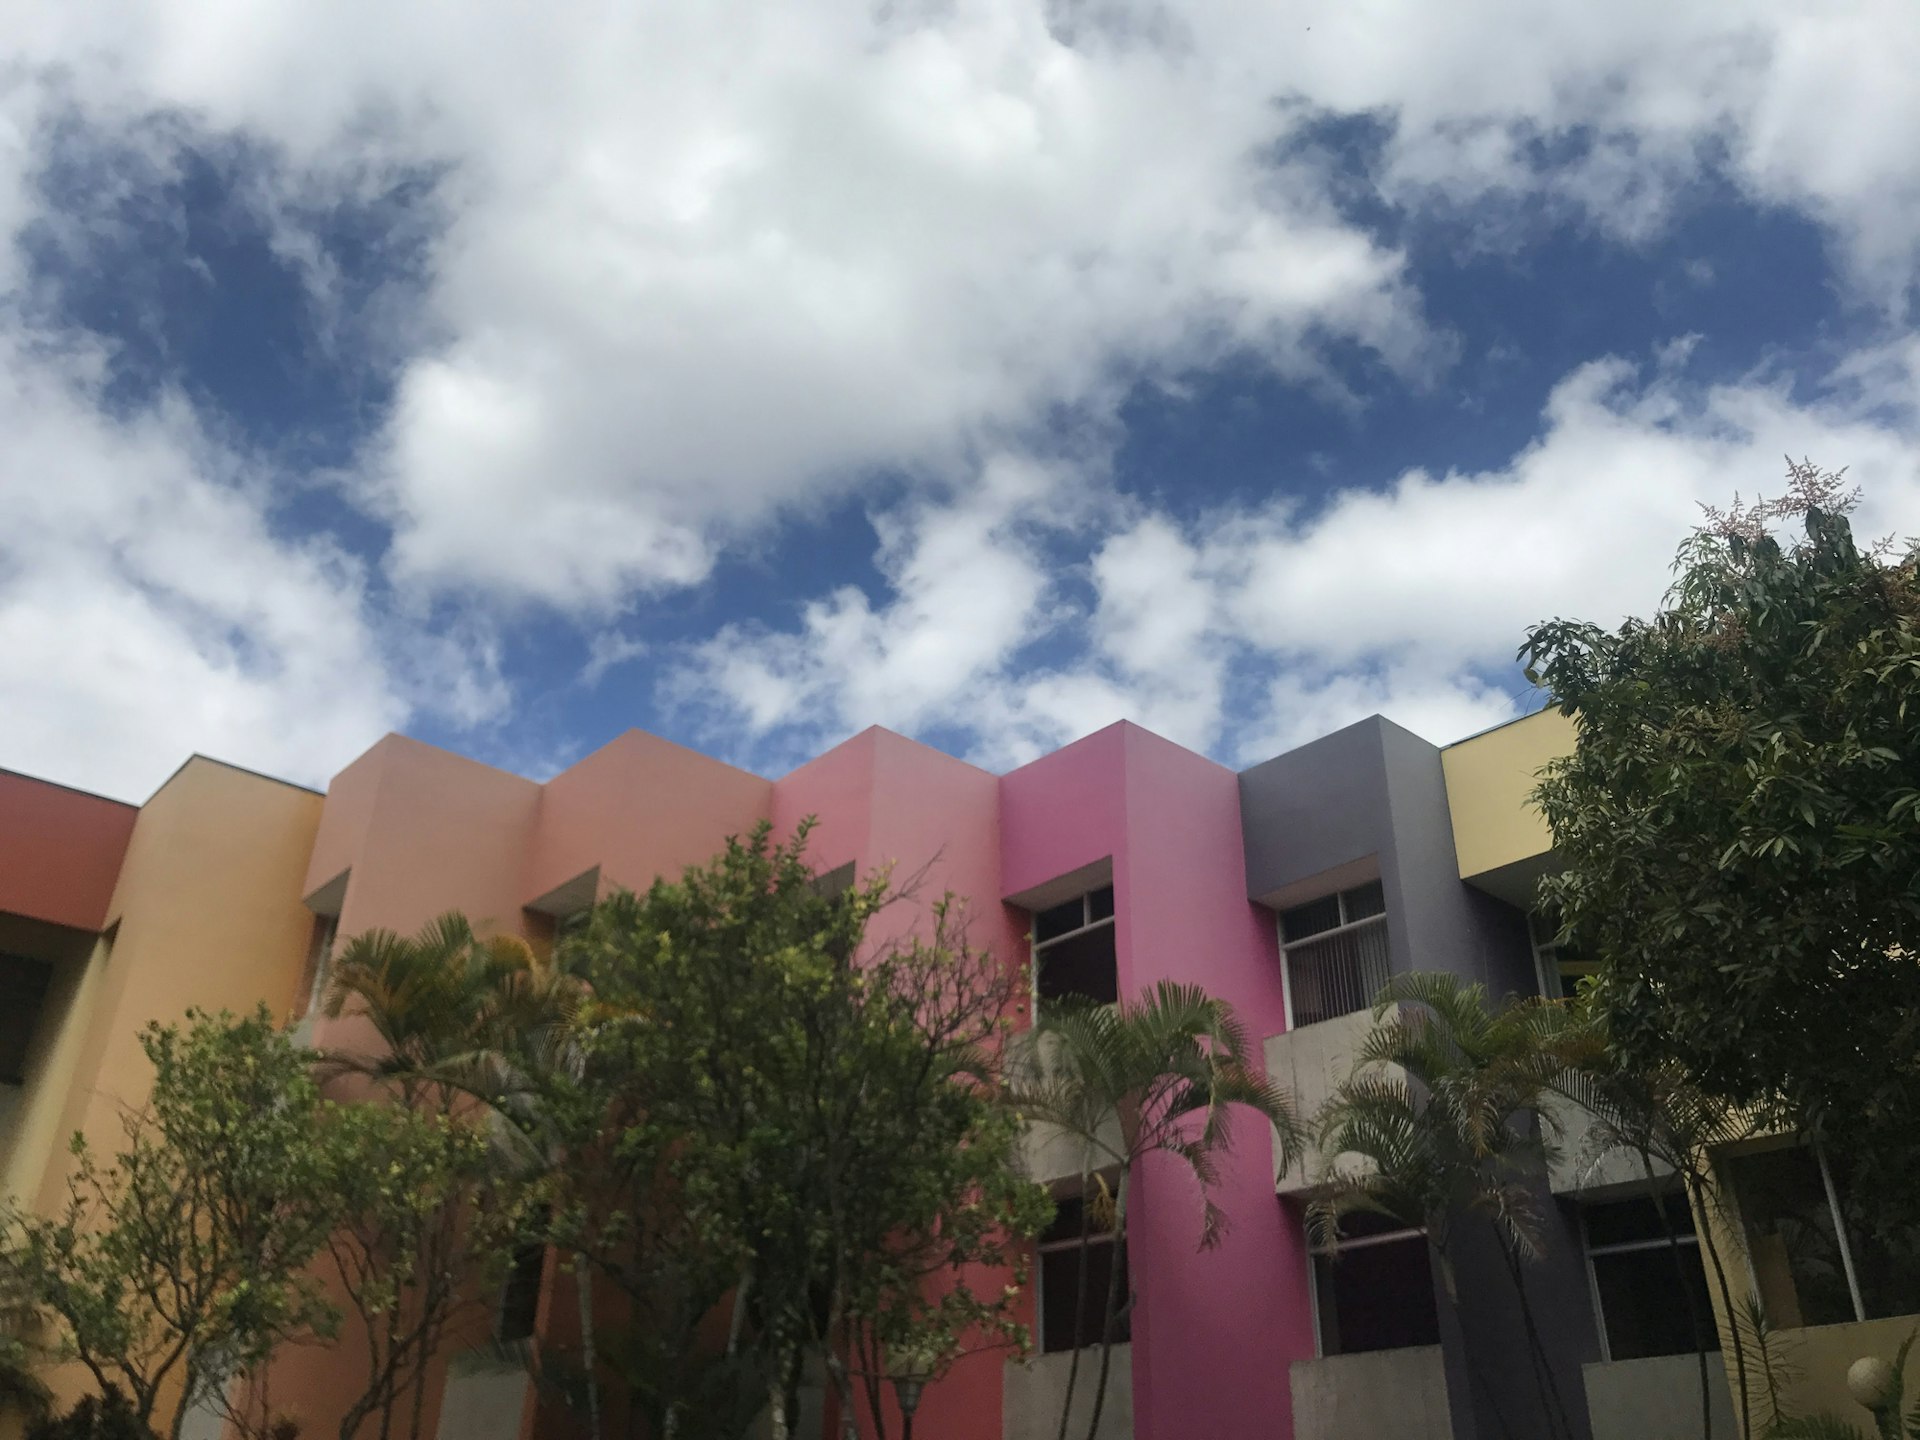 A row of colorful buildings against a blue sky